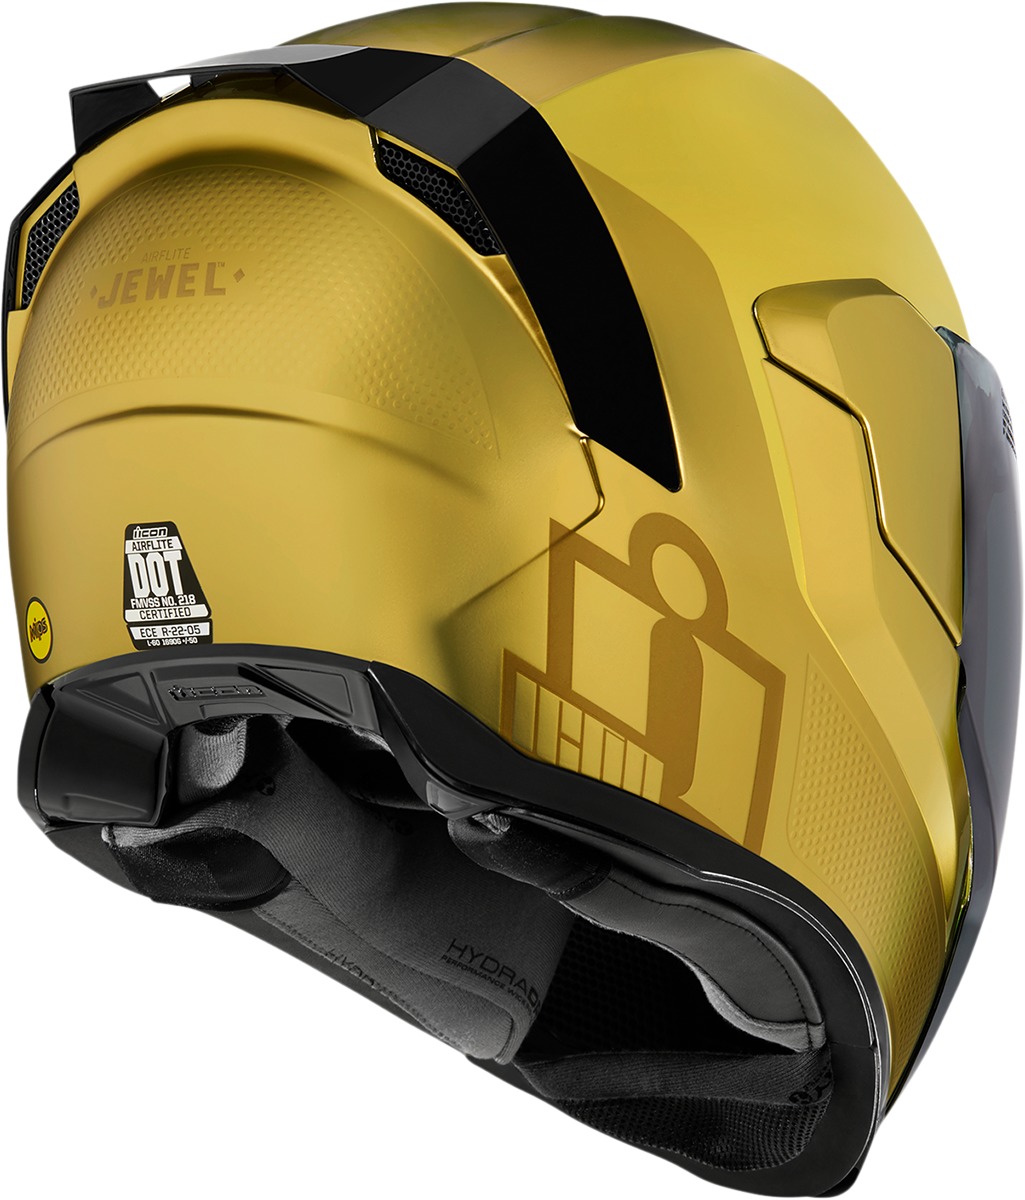 Gold Airflite Jewel MIPS Motorcycle Helmet - Small - Meets ECE 22.05 and DOT FMVSS-218 Standards - Click Image to Close